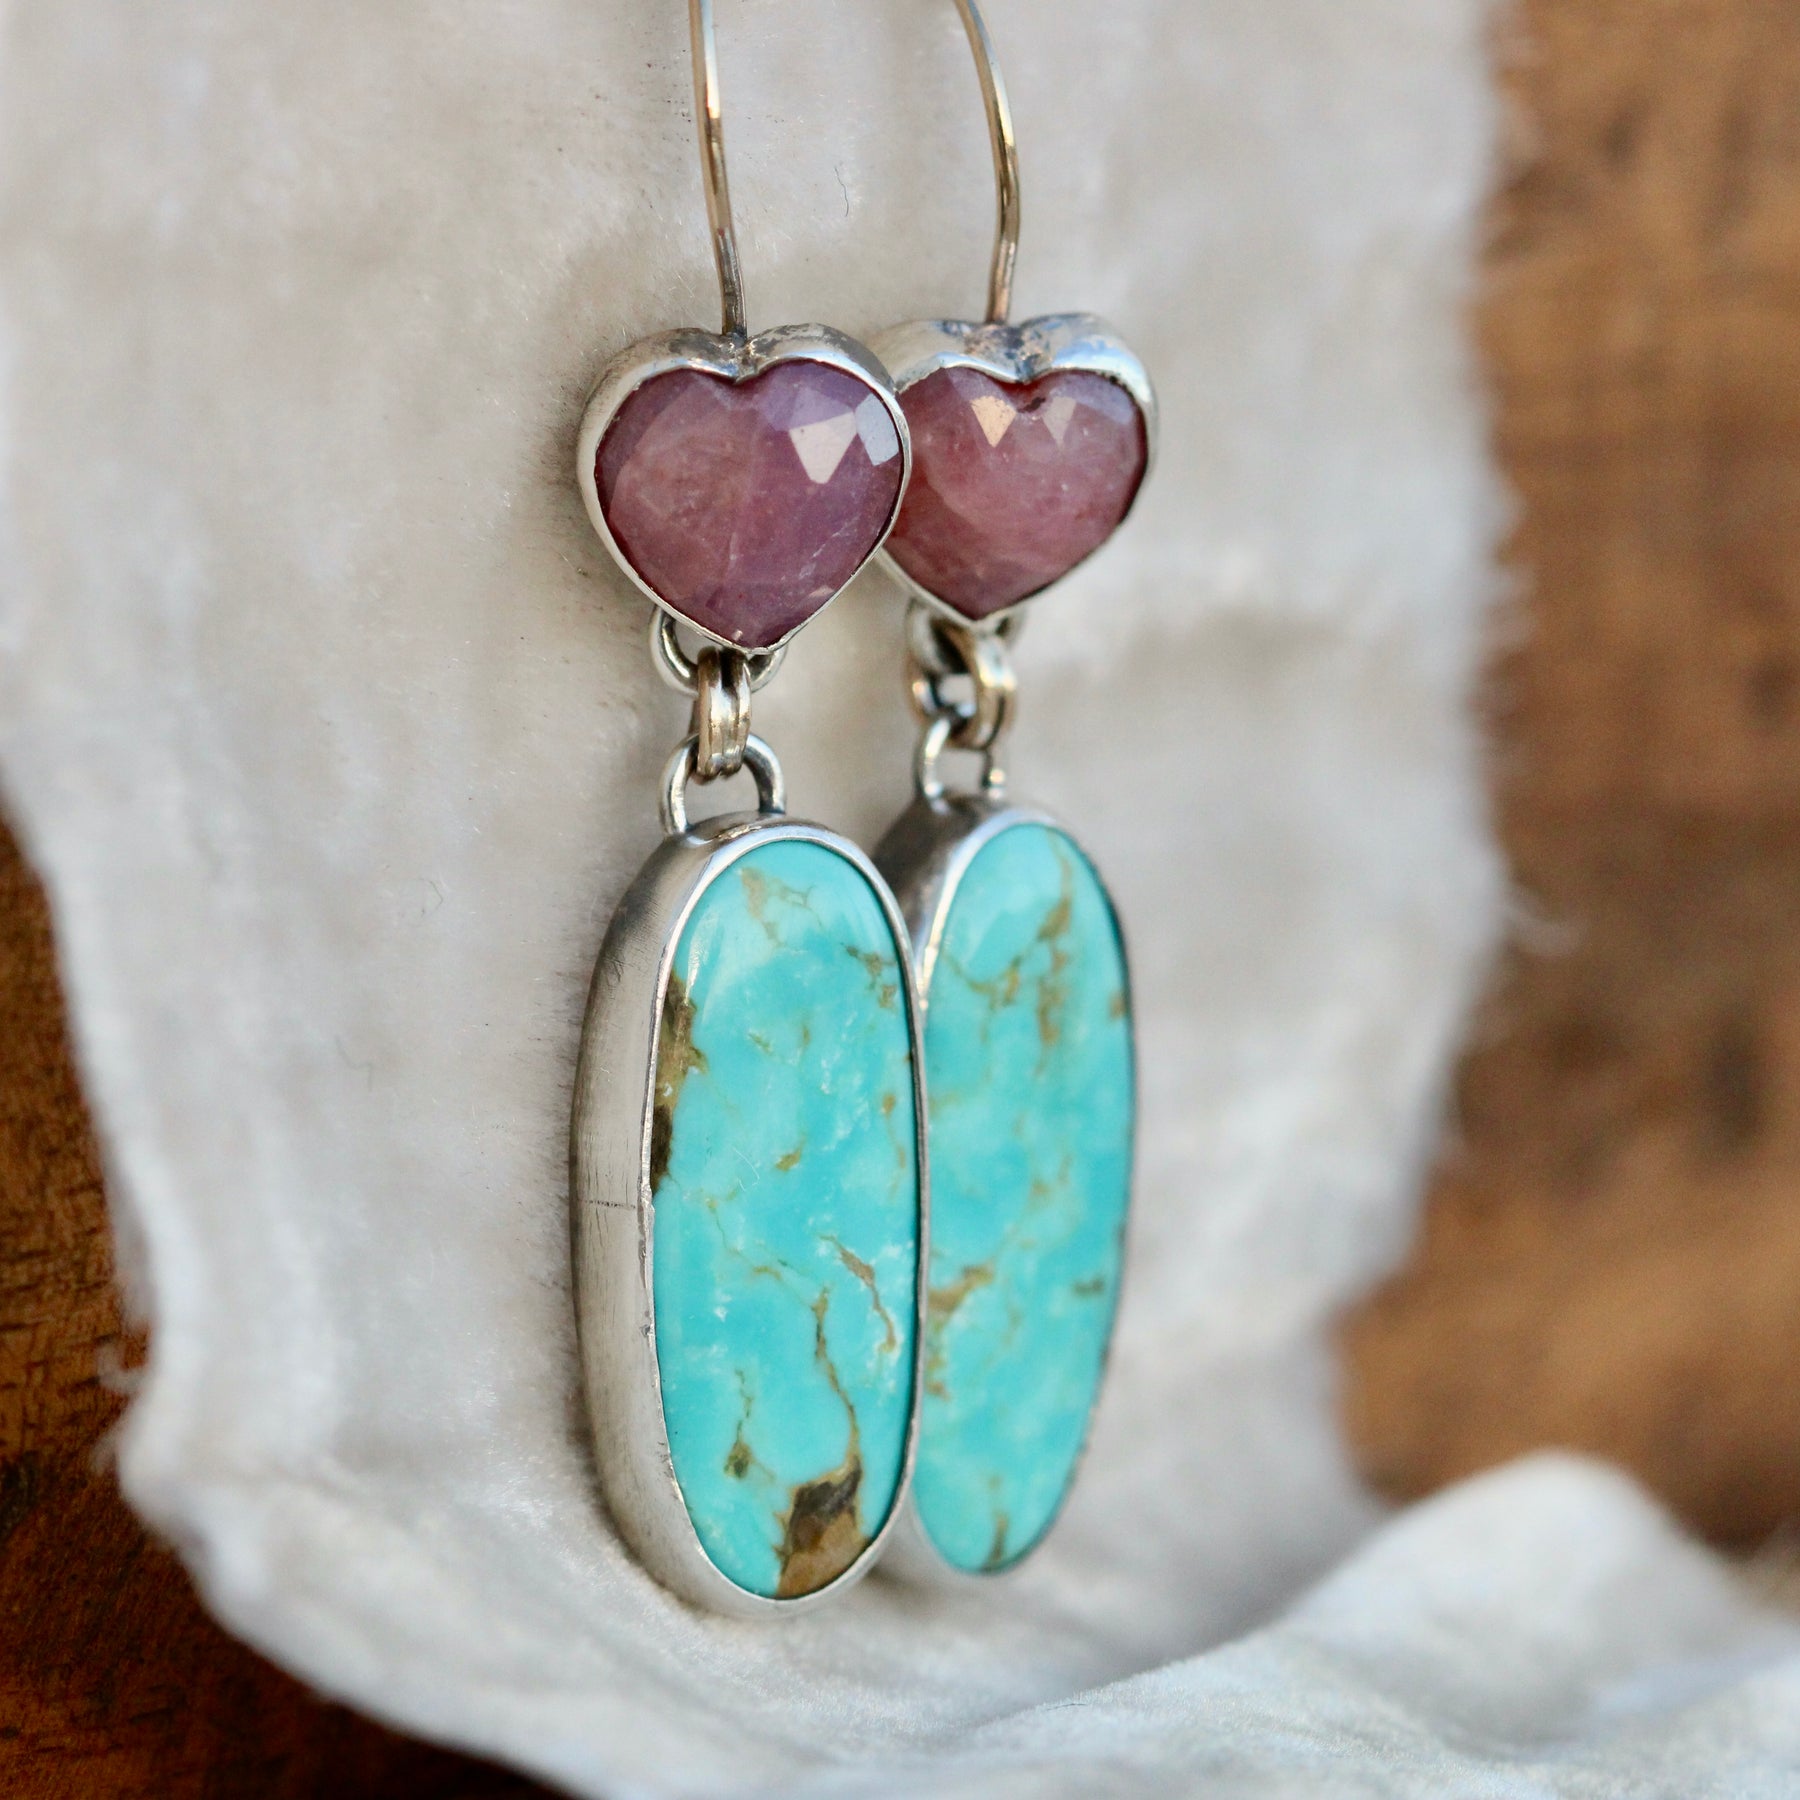 Natural Turquoise and Ruby earrings with 10k gold ear wires